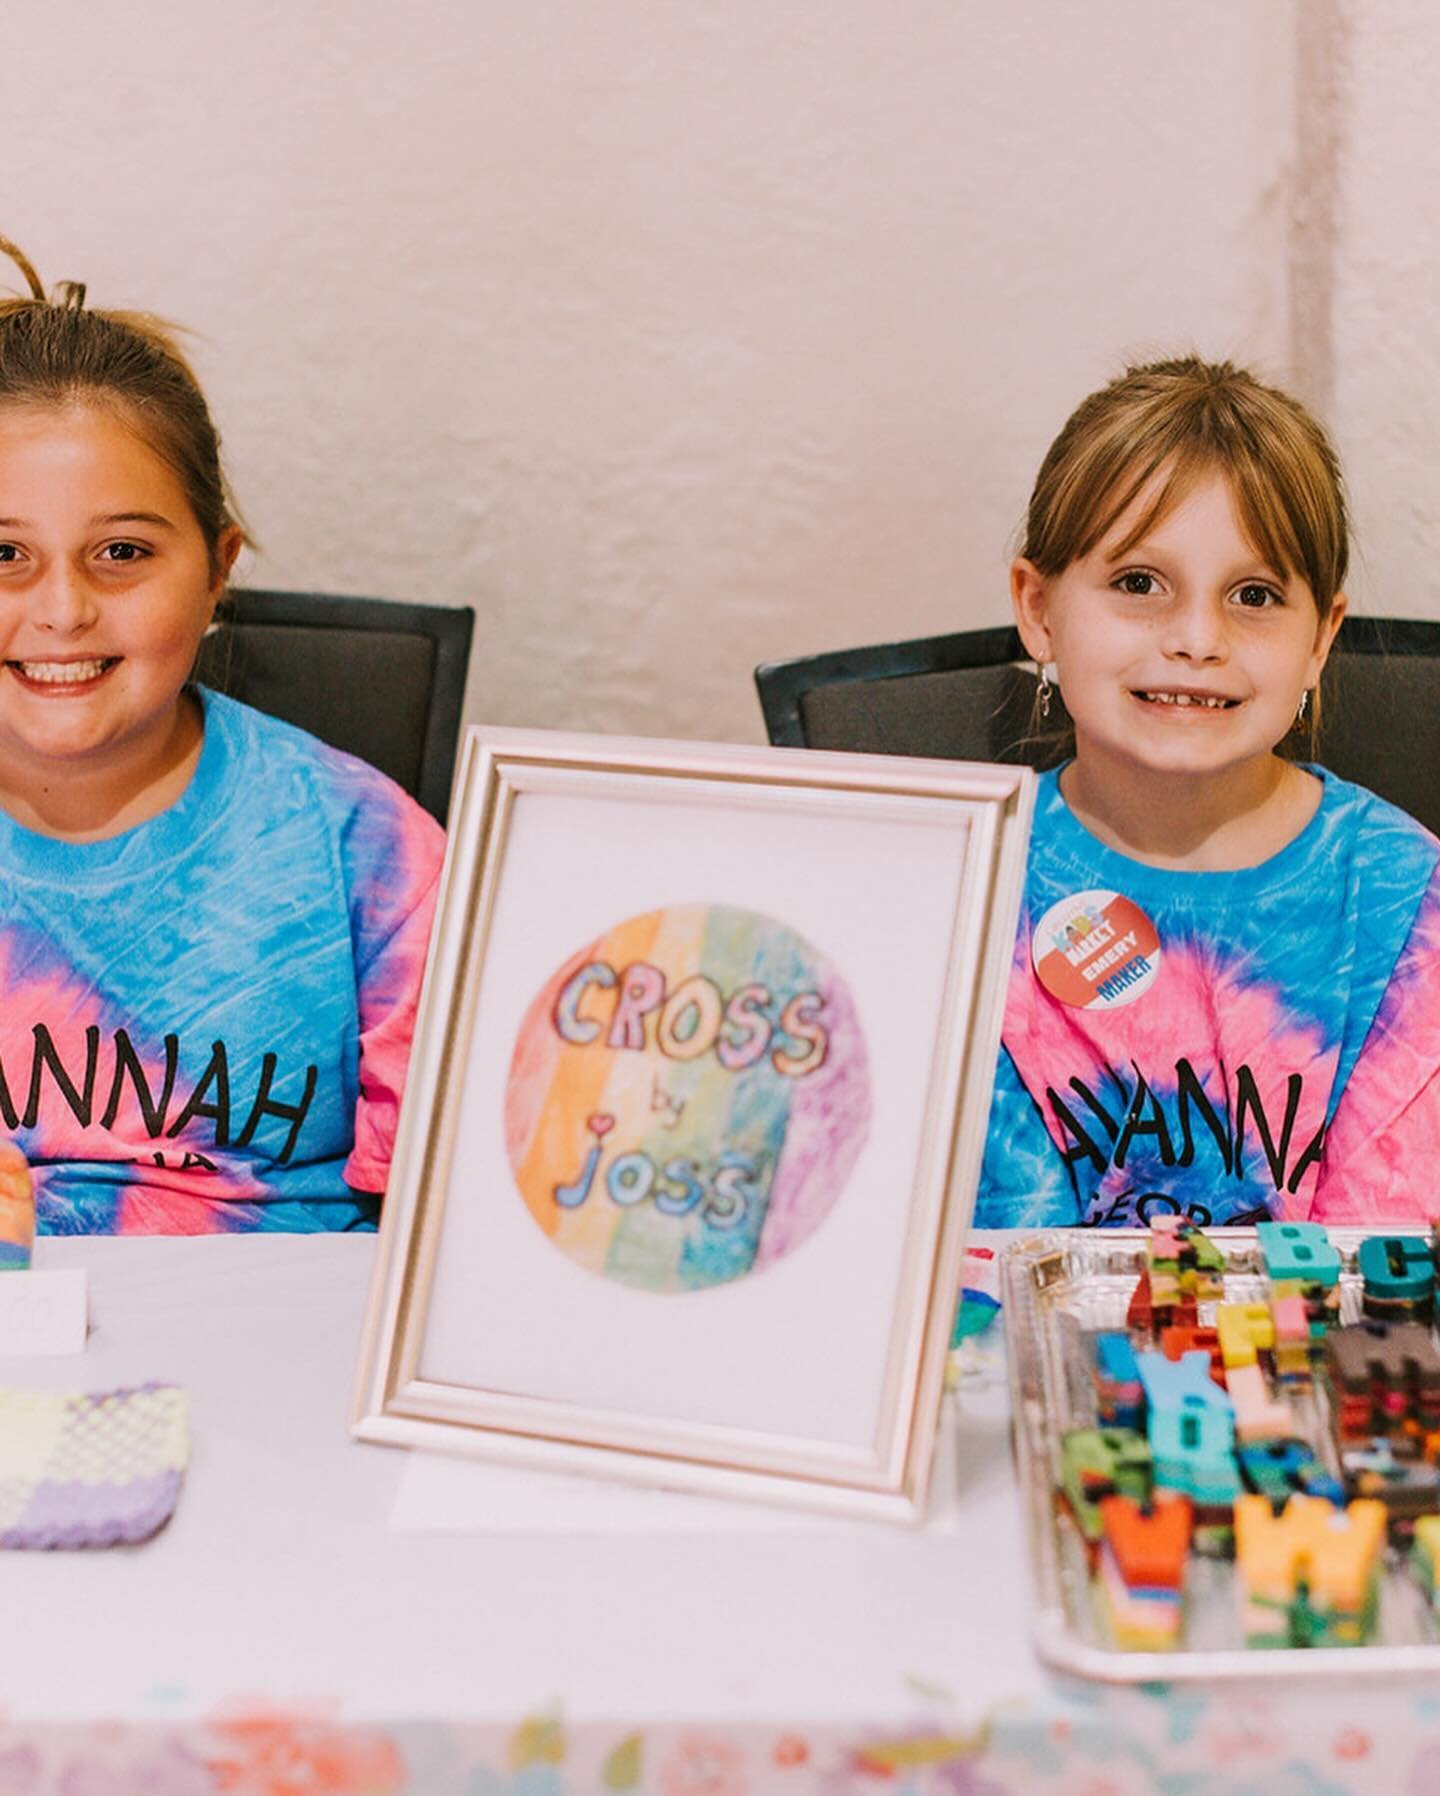 🎨🌟 Calling all young makers and creative minds! 🌱🍰

Do you have a budding artist, culinary enthusiast, or plant aficionado in your life, aged 6 to 18? Then we have the perfect platform to showcase their talents! 🌟

☀️Introducing the Creative Kid